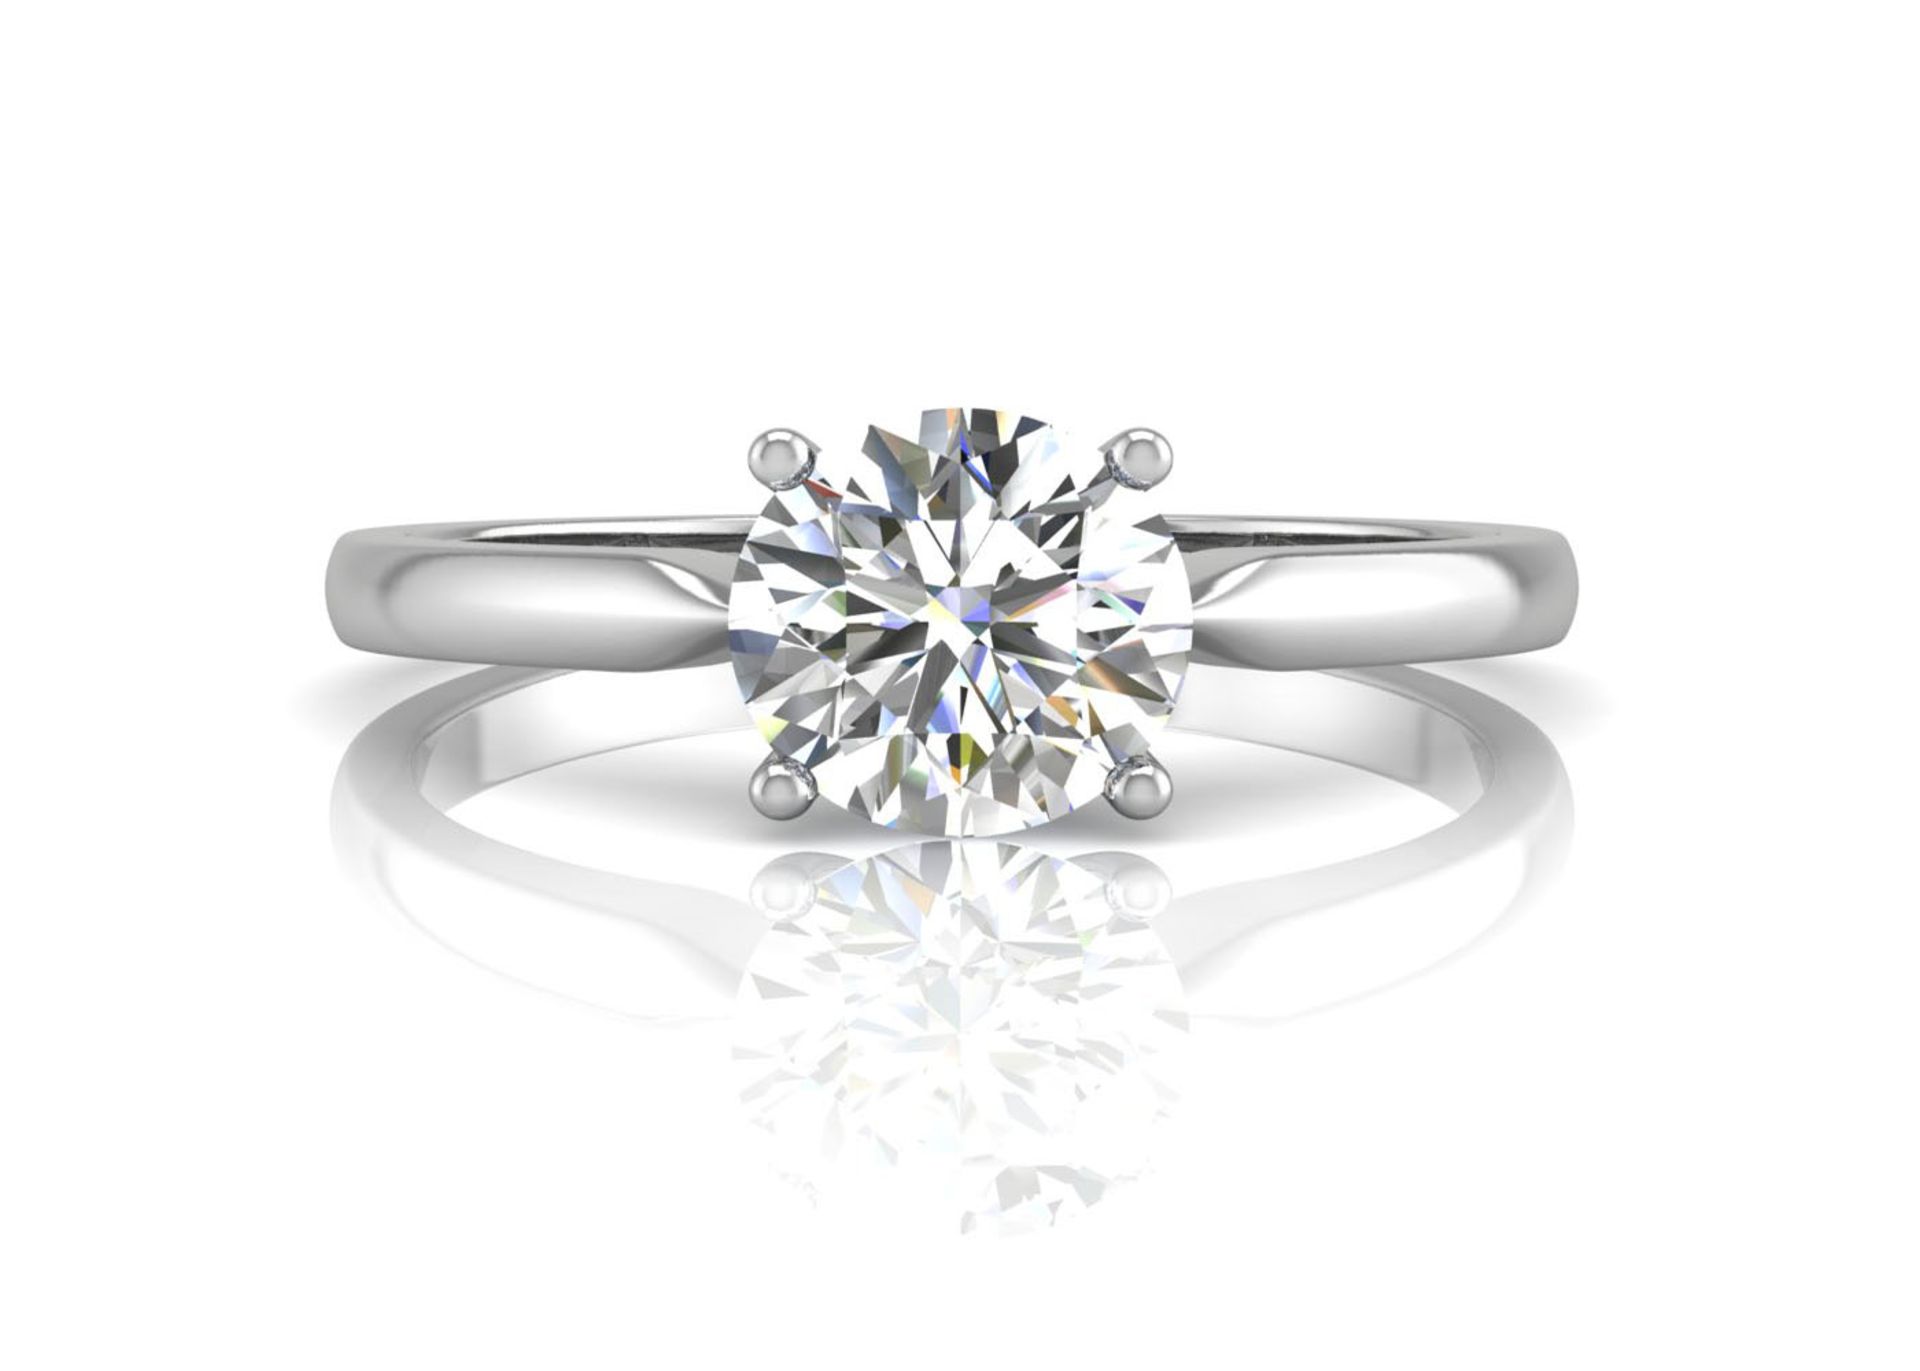 Valued by AGI £8,955.00 - 18ct White Gold Single Stone Diamond Enagagement Ring D IF 0.50 Carats - - Image 3 of 4